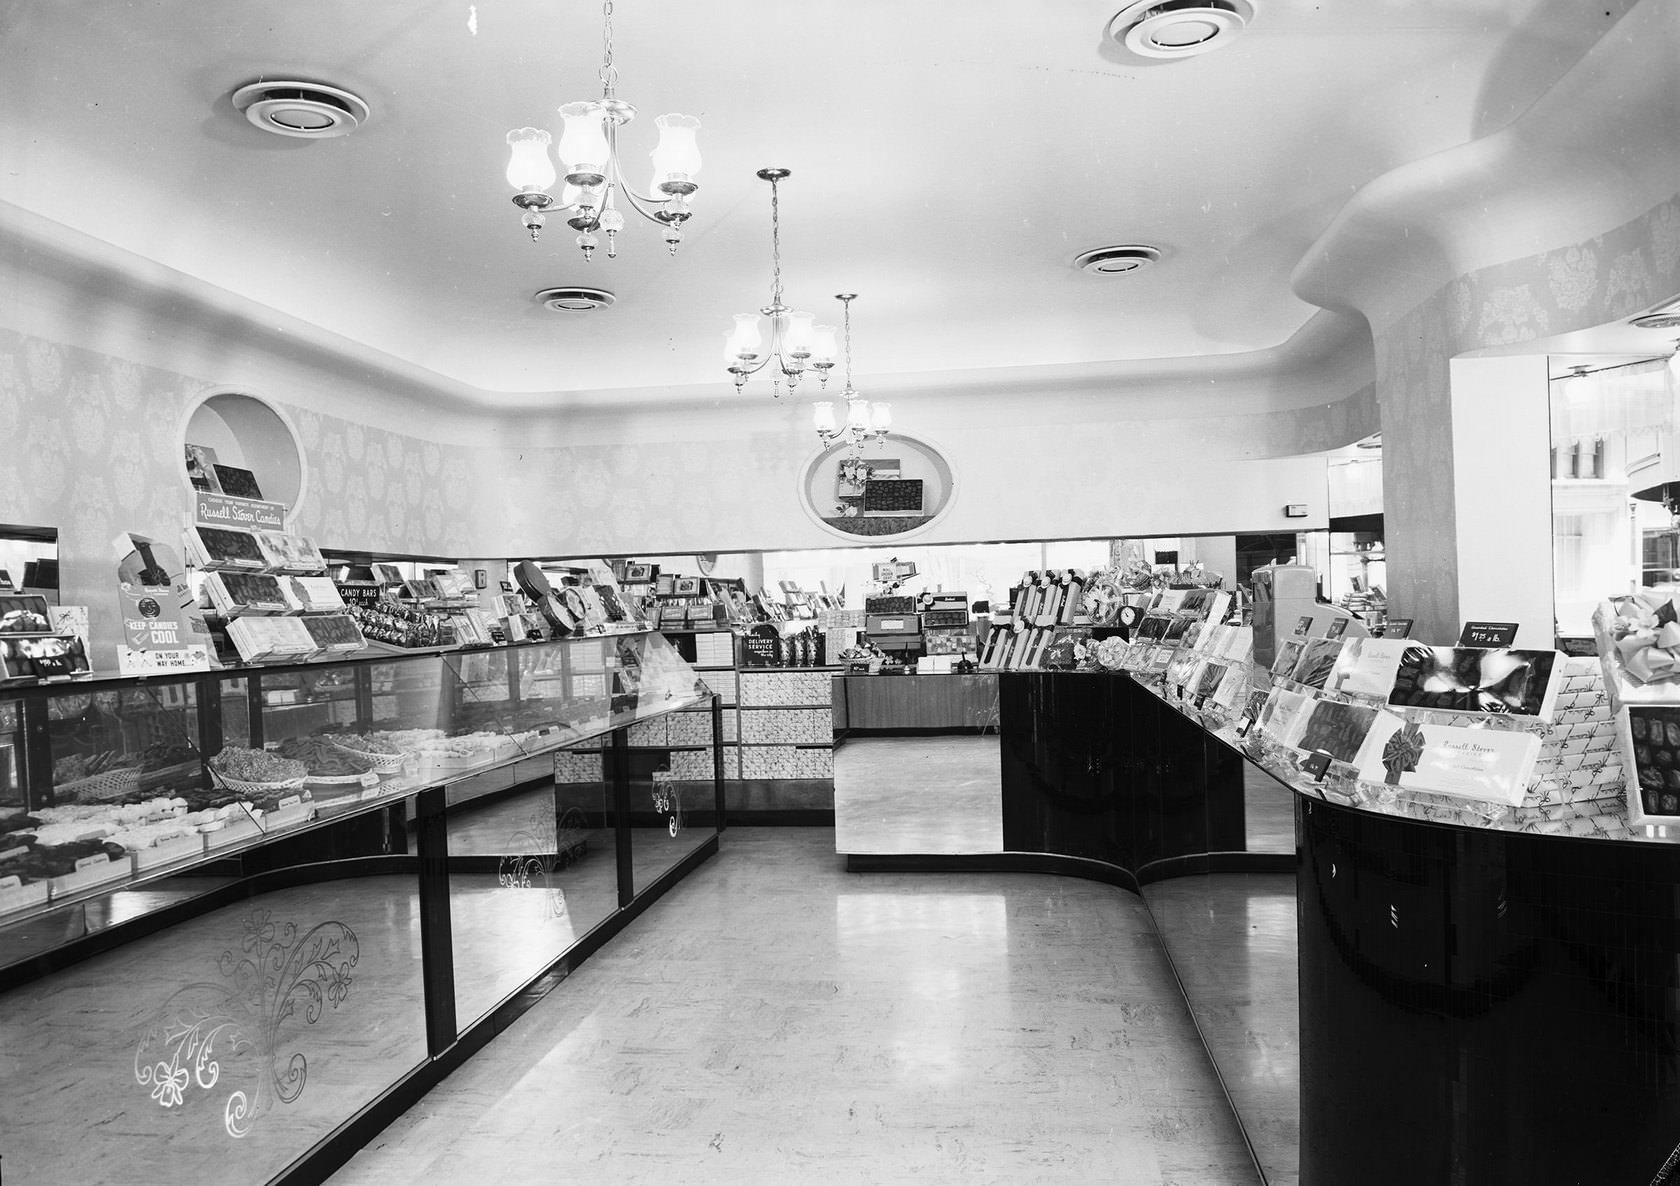 Russell Stover Candies shop, interior, located at Main and Akard streets, Dallas, Texas, 1954